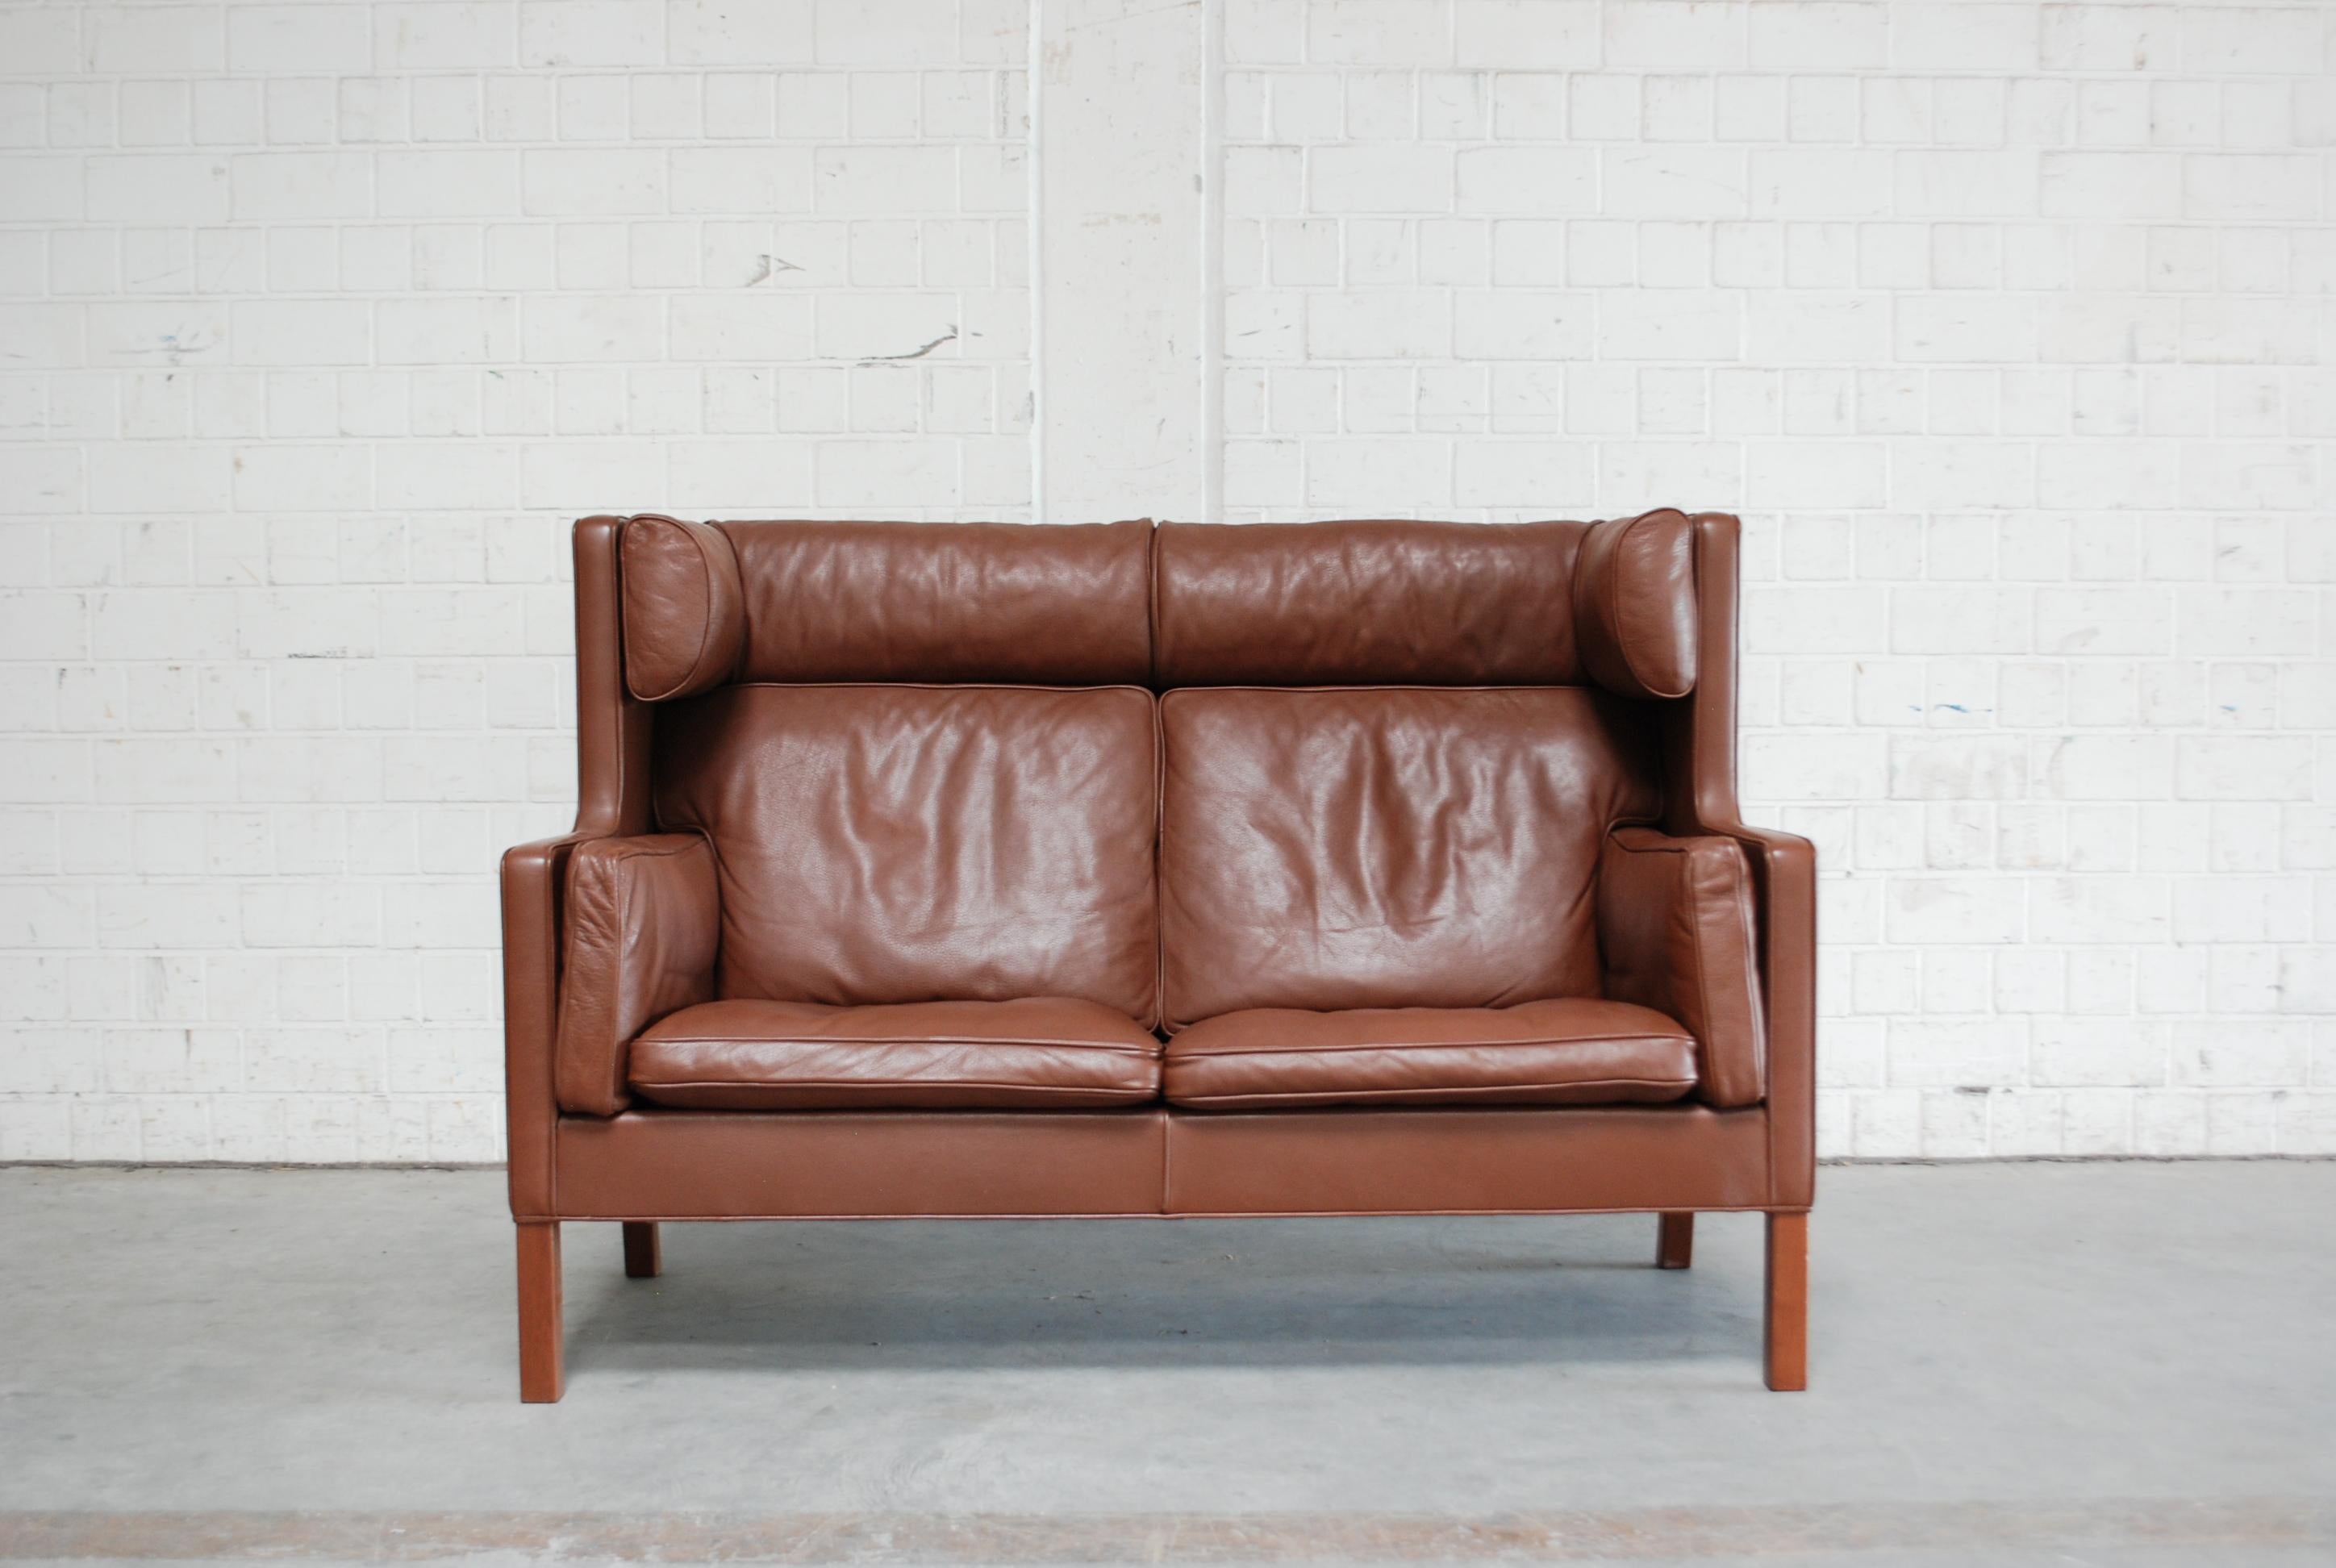 Børge Mogensen designed this leather Sofa Coupe model 2192 for Fredericia Stolefabrik.
It´s a semianilne brown leather with walnut feet.
A Danish masterpiece of upholstery design and great seating comfort.